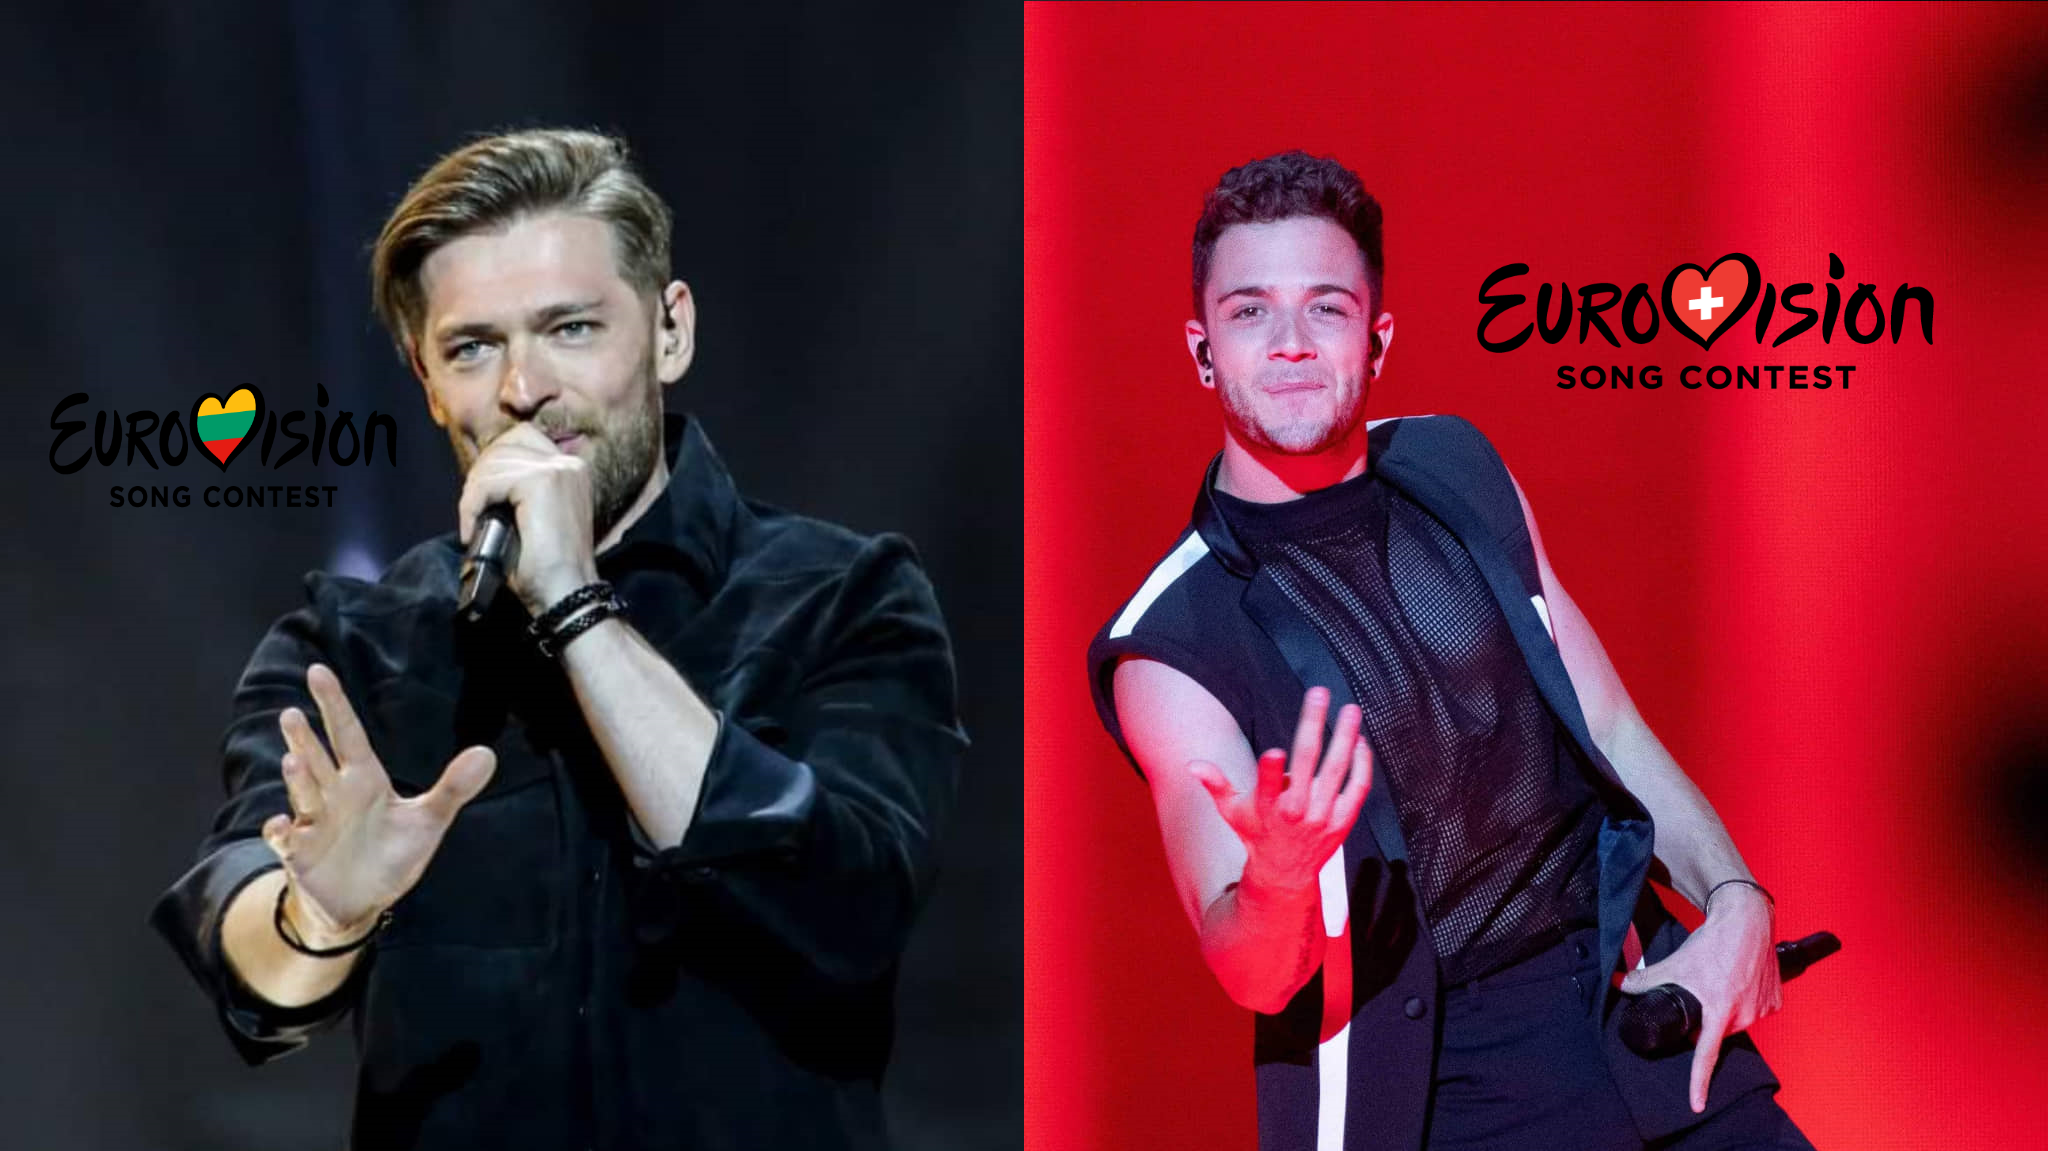 Eurovision 2020: Lithuania and Switzerland confirm participation; Bosnia&Herzegovina one more year away